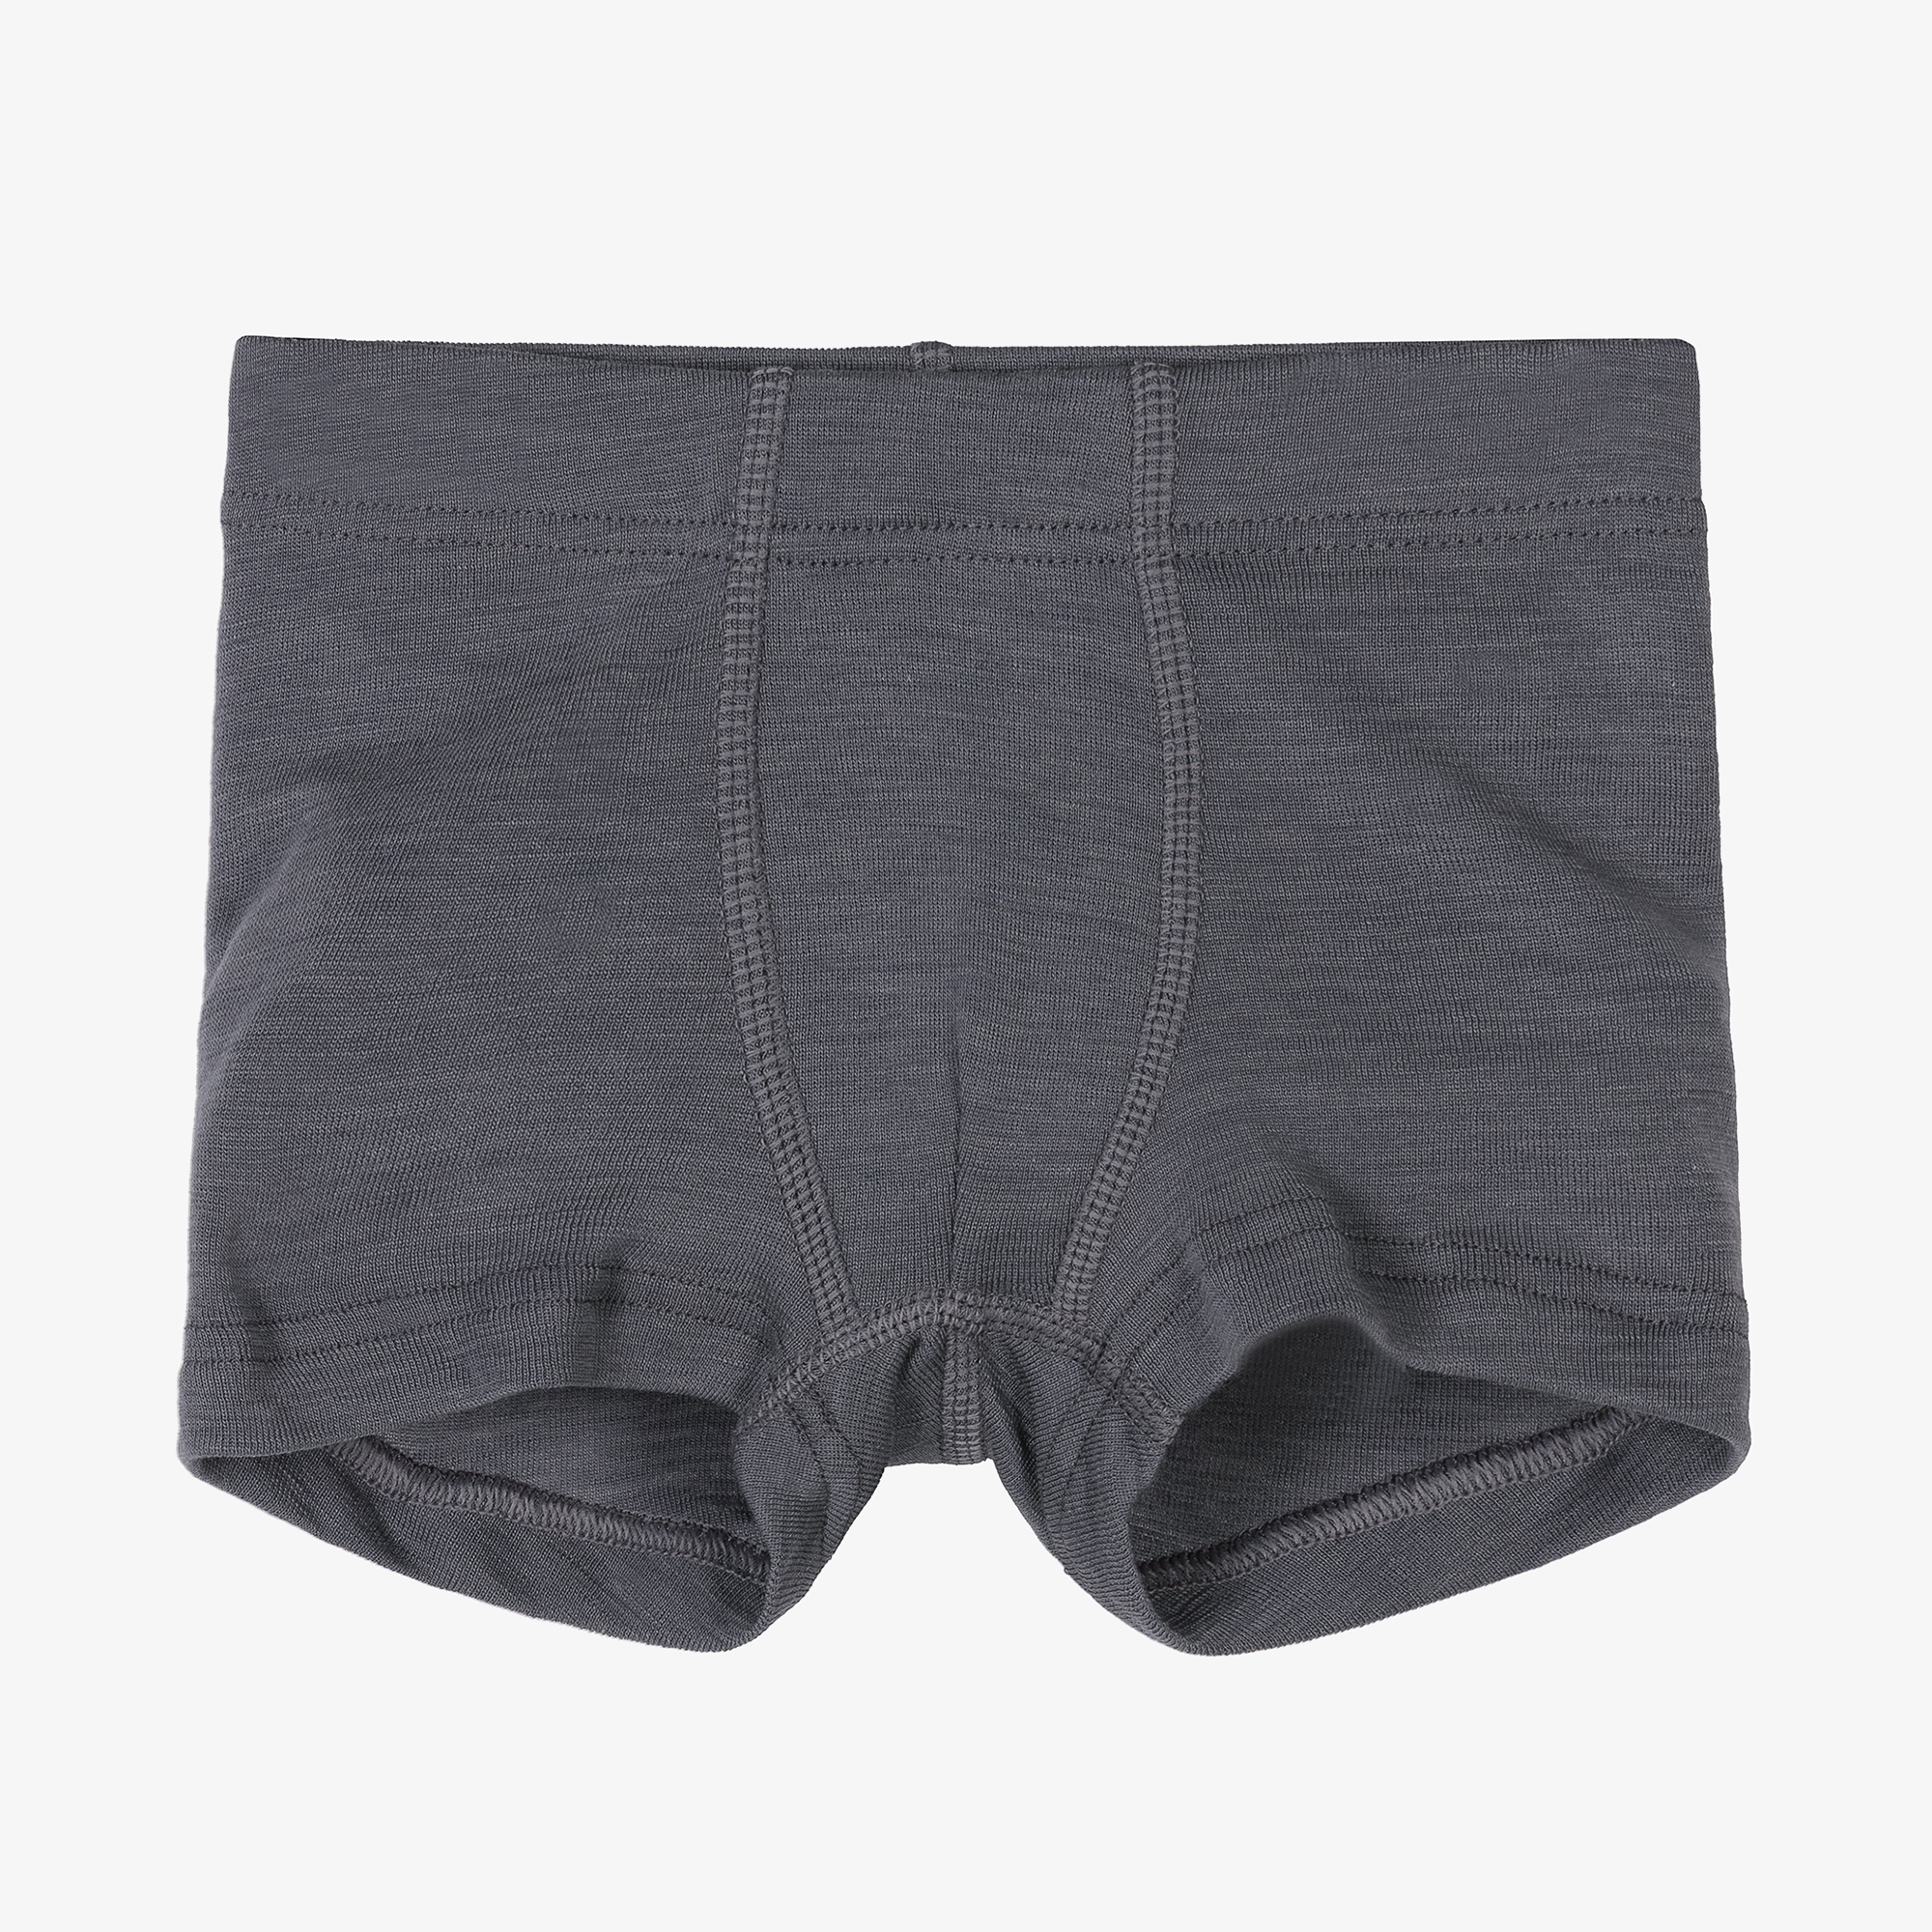 Silk Boxers For Women